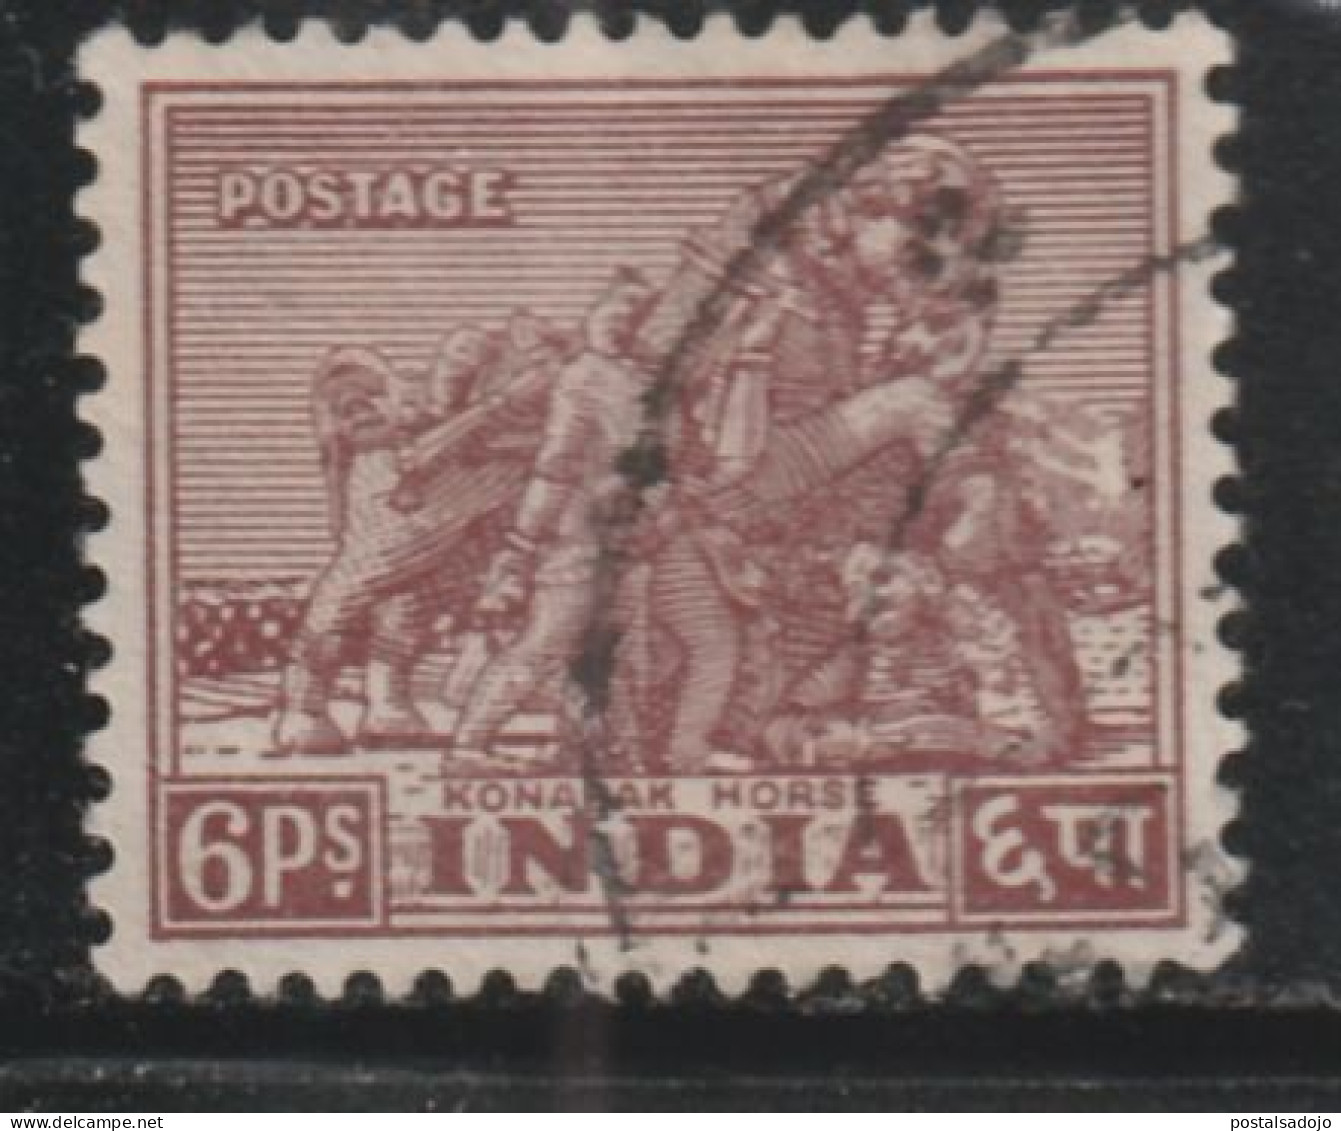 INDE 555 // YVERT 8 // 1949 - Used Stamps